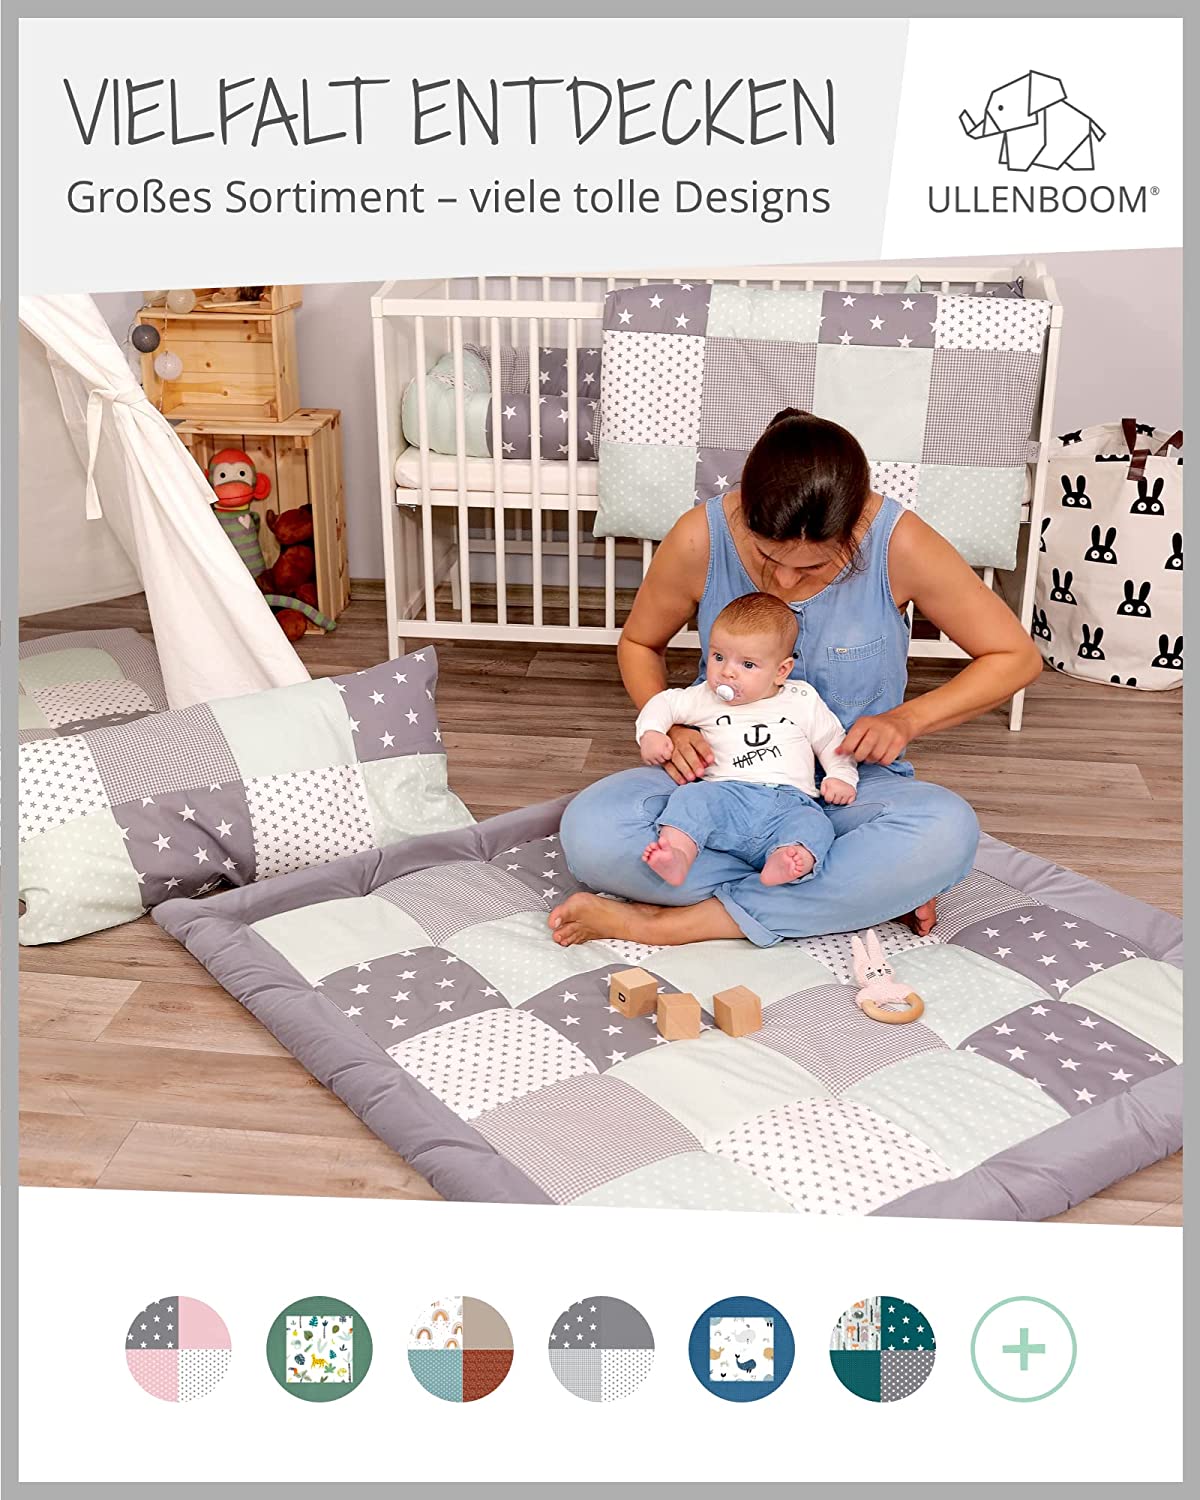 Ullenboom ® Baby Bedding Set - 2 Pieces (Complete): Baby bed linen 80 x 80 cm and pillowcase 35 x 40 cm, baby bed set for the baby bed made from 100% cotton. Mint grey